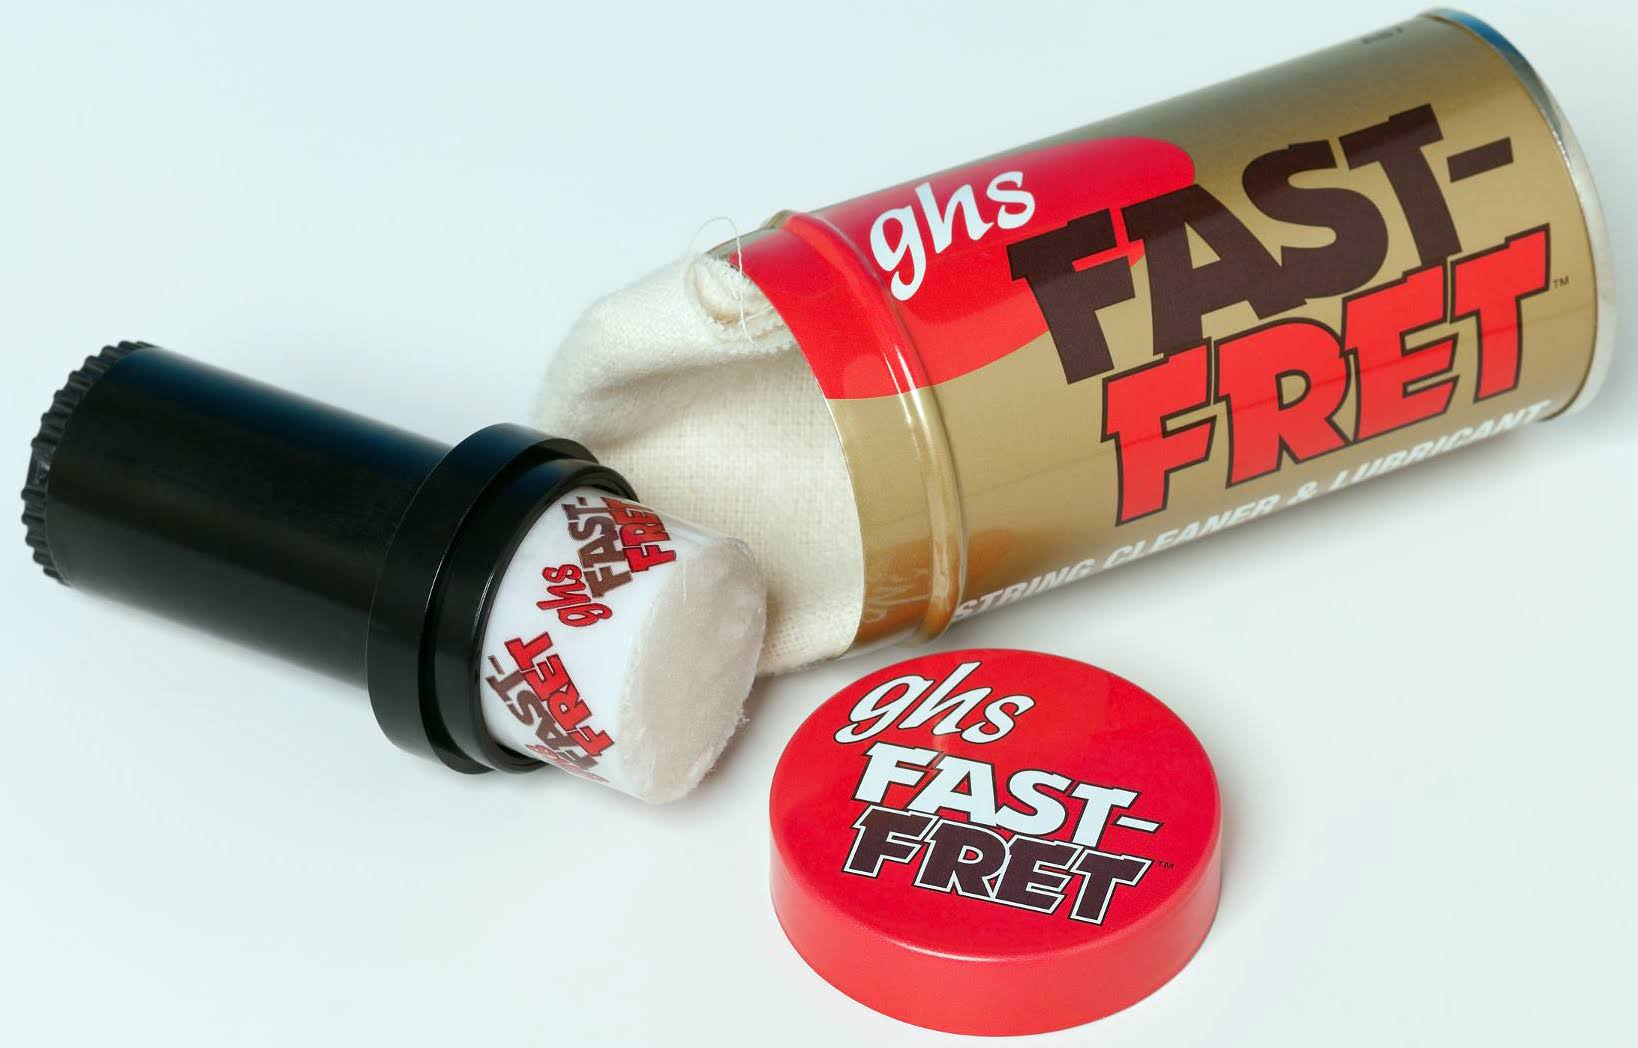 GHS Fast Fret String and Neck Lubricant